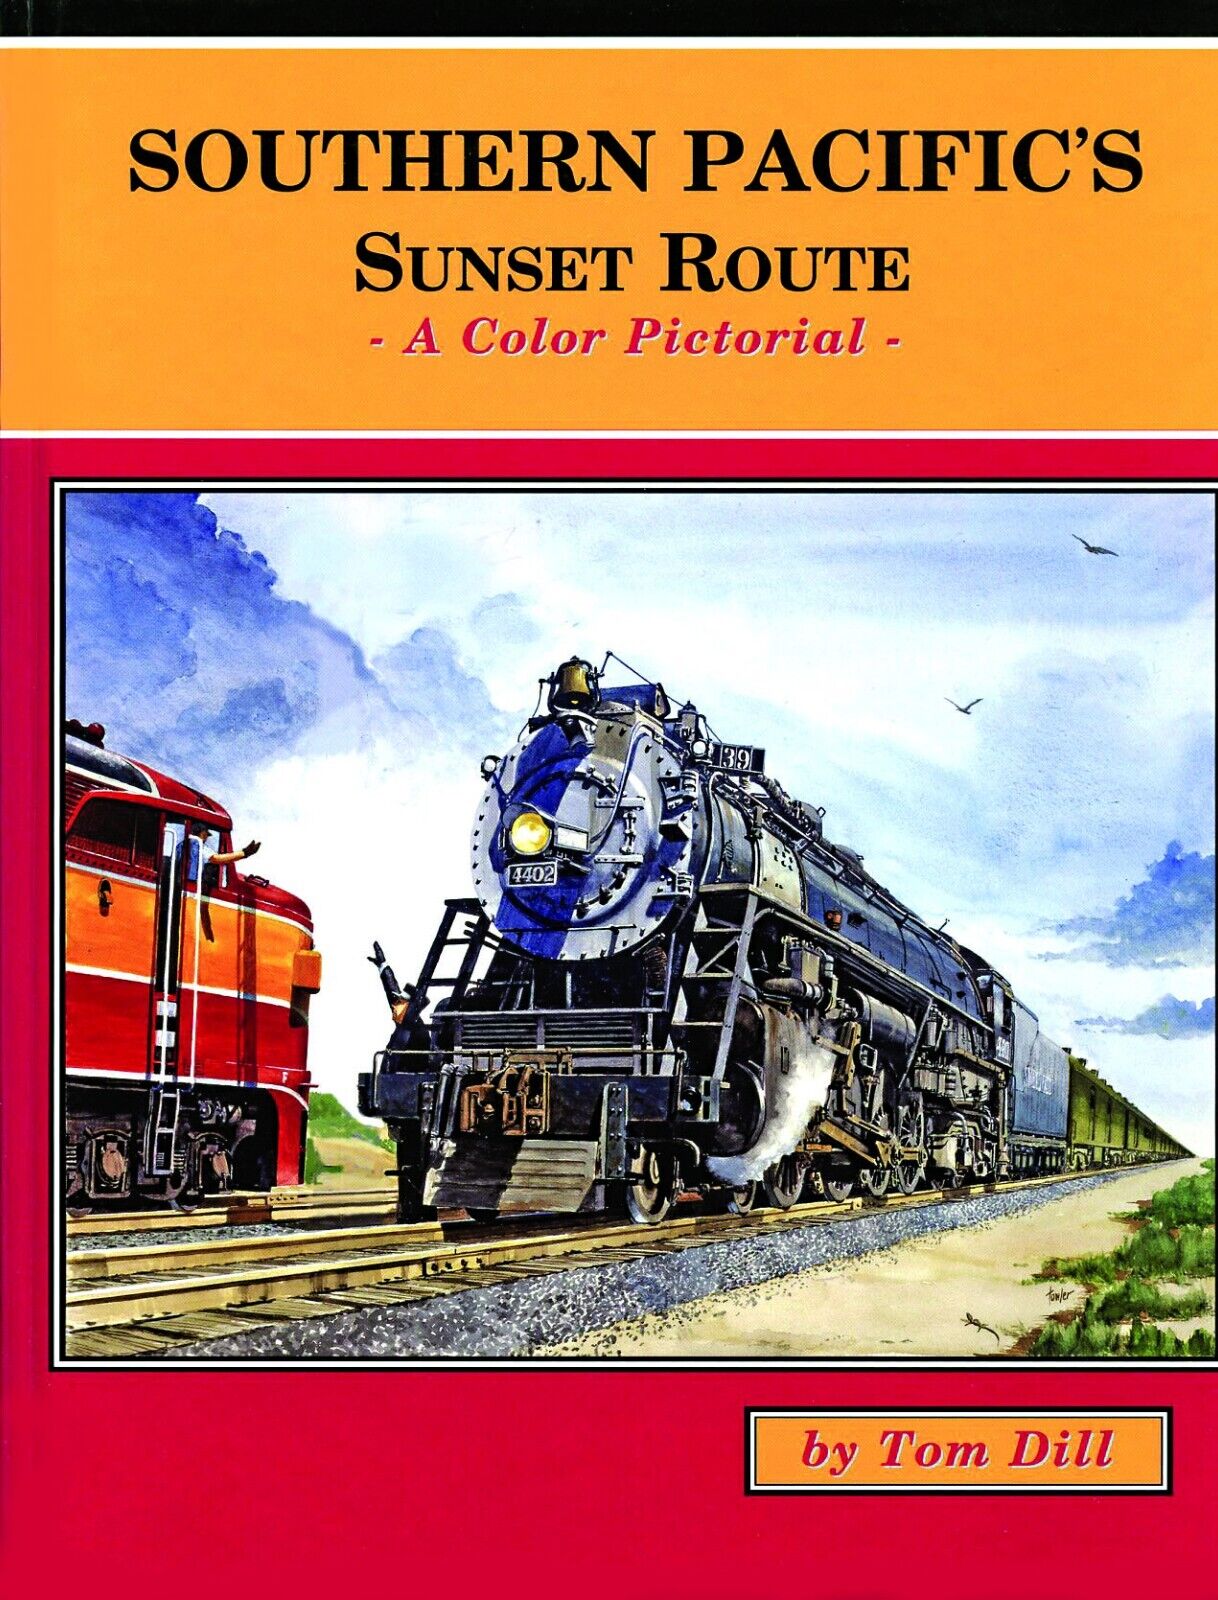 SOUTHERN PACIFIC\'s SUNSET ROUTE, A Color Pictorial - (BRAND NEW BOOK)